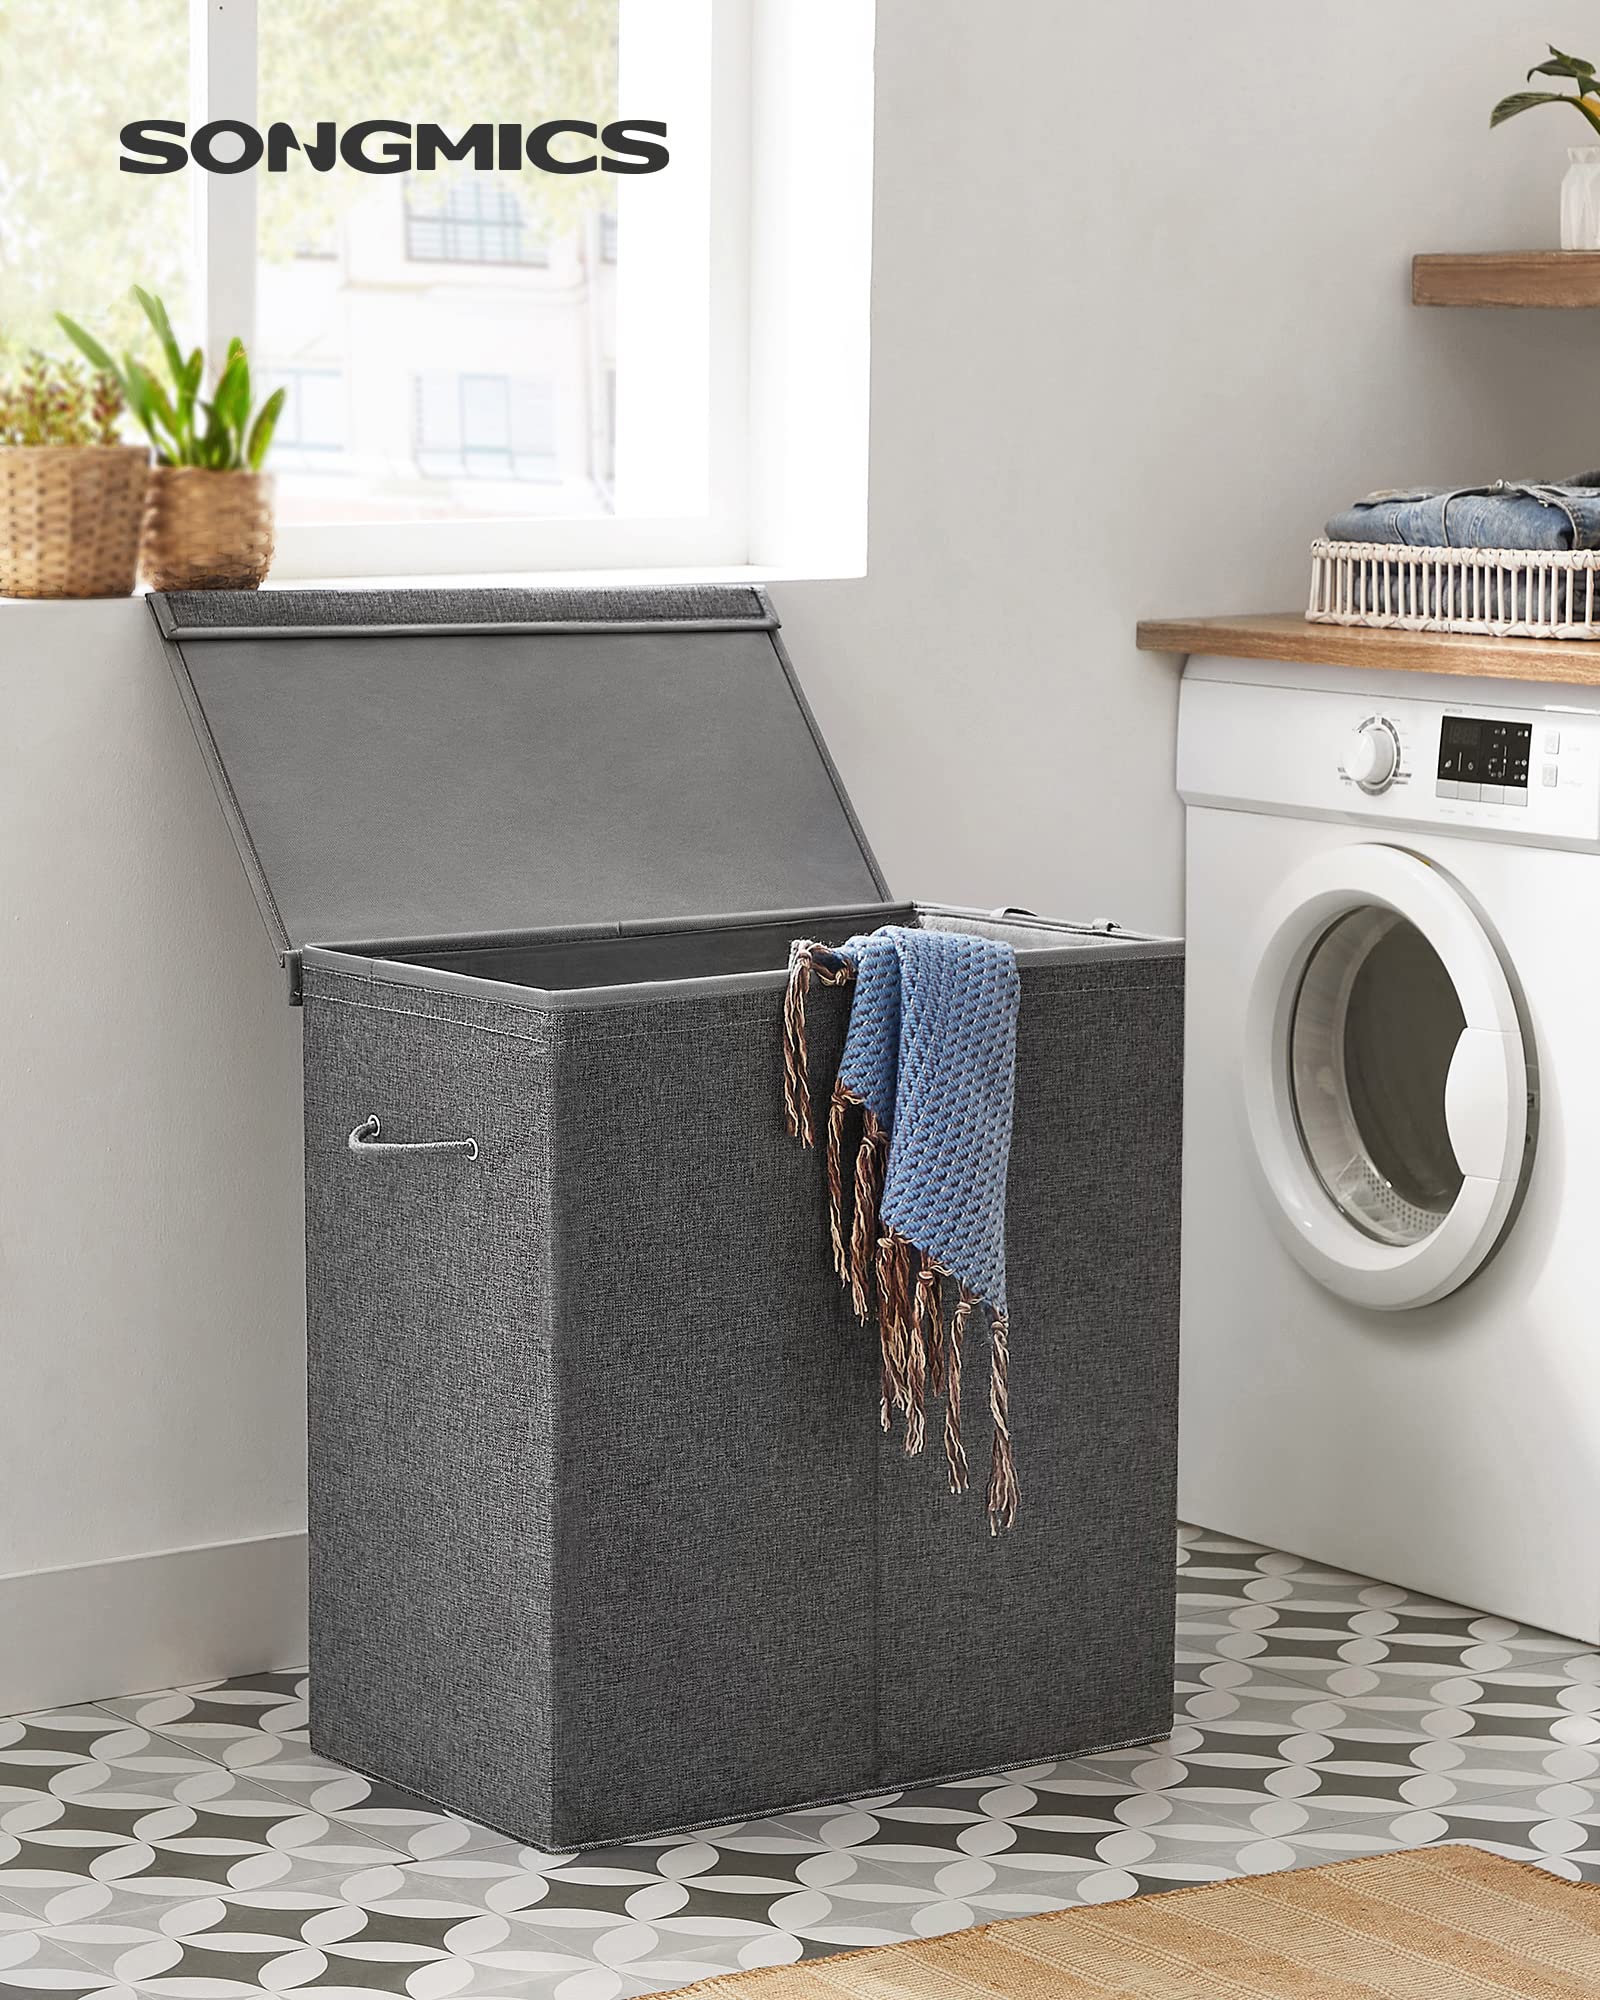 SONGMICS 37.5 Gal. Foldable Laundry Basket with 2 Compartments, Magnetic Lid and Handles, Removable Liner Bag, Dark Gray